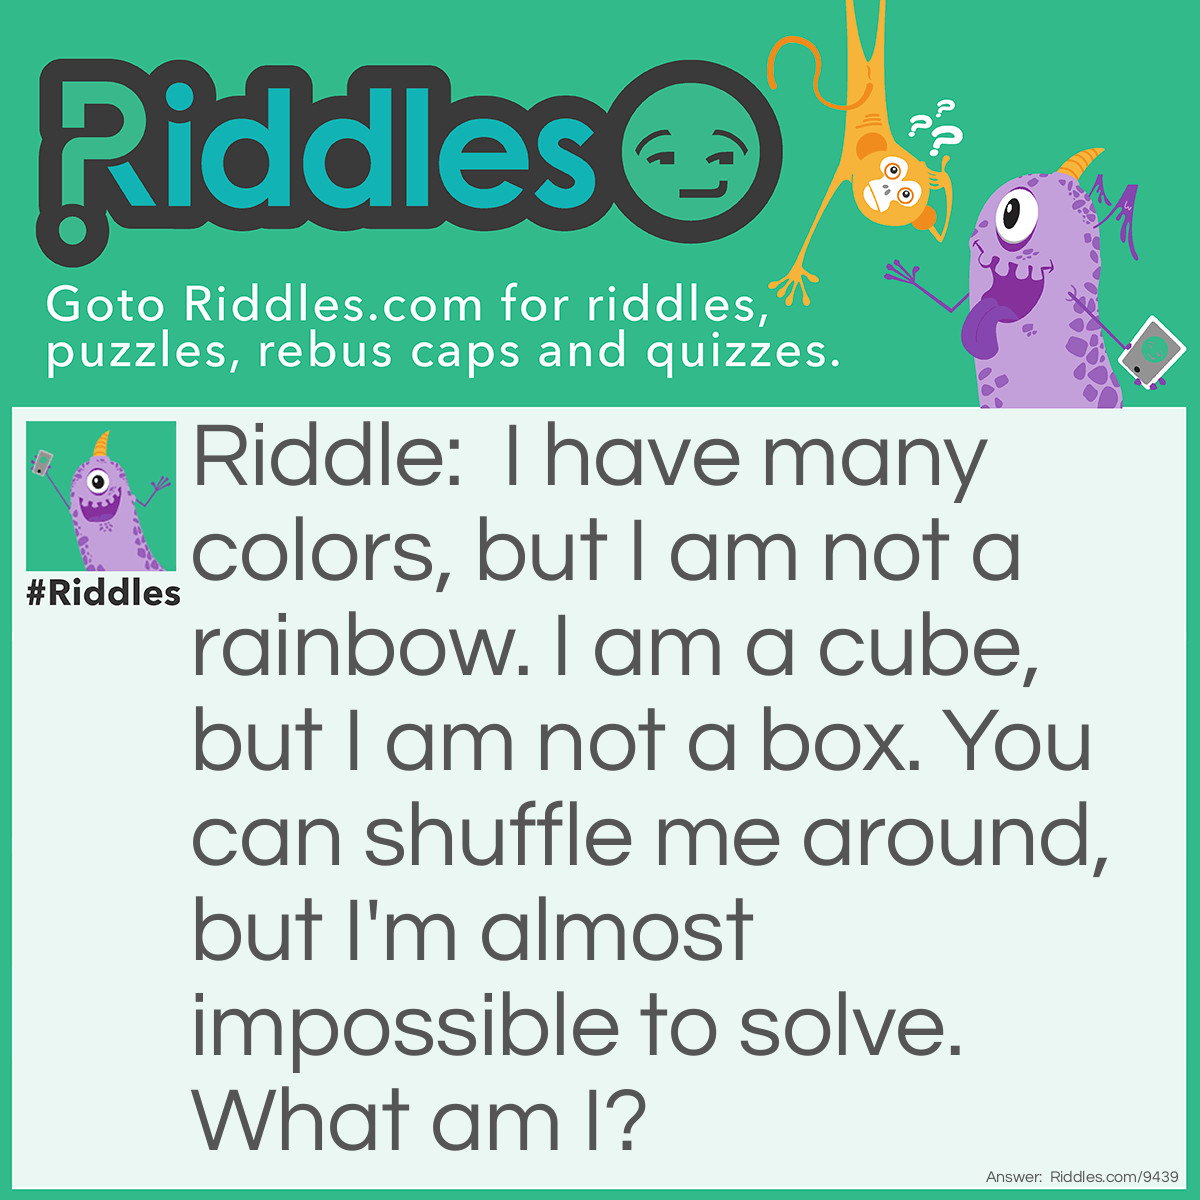 Riddle: I have many colors, but I am not a rainbow. I am a cube, but I am not a box. You can shuffle me around, but I'm almost impossible to solve. What am I? Answer: A Rubik's cube!